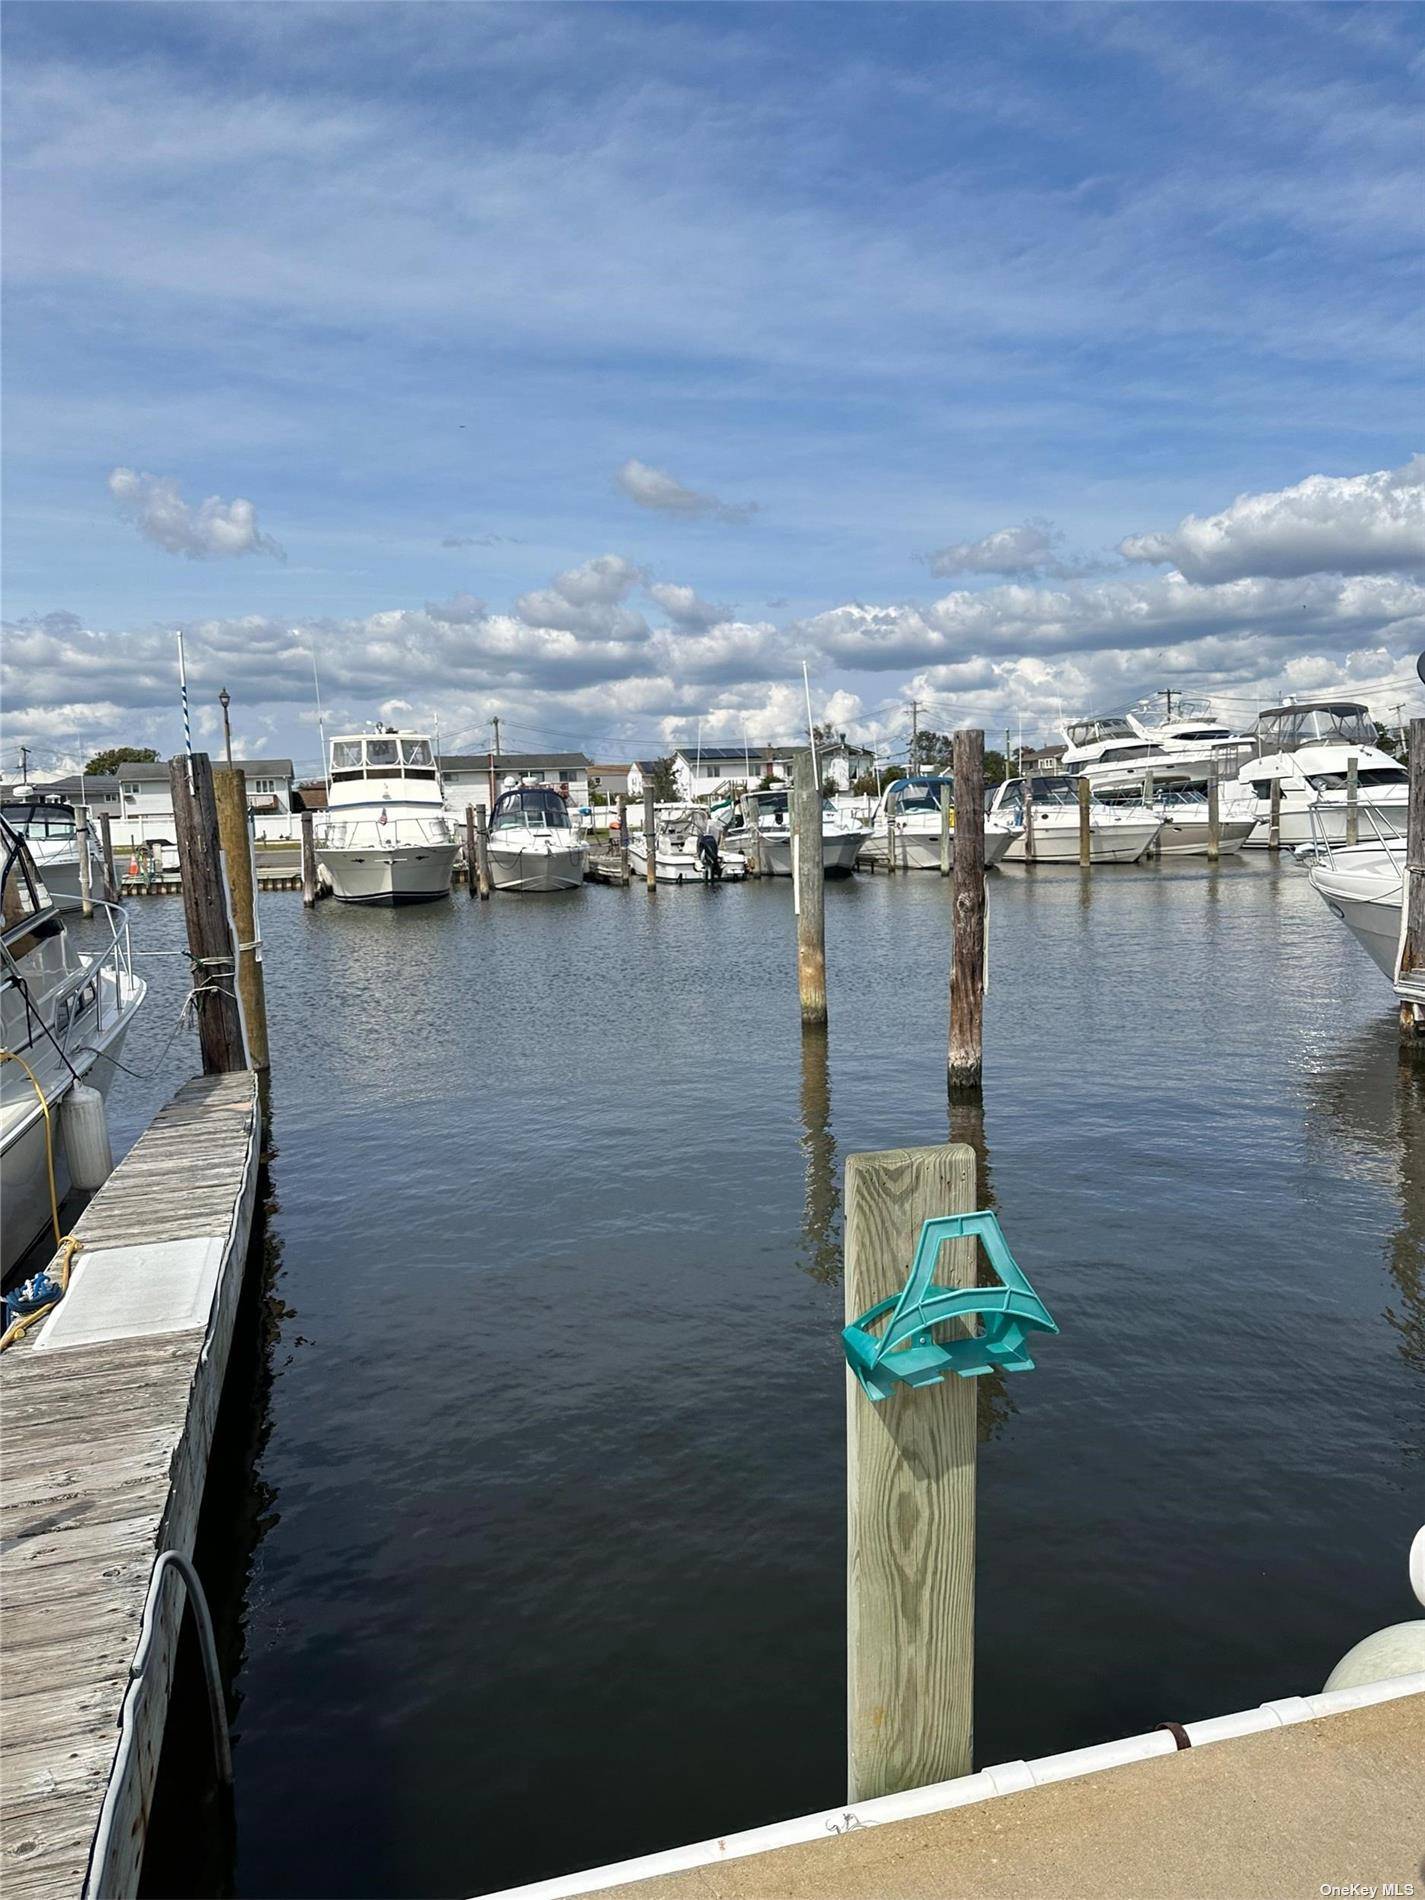 Deeded Boat Slip located at the Anchorage Yacht Club.